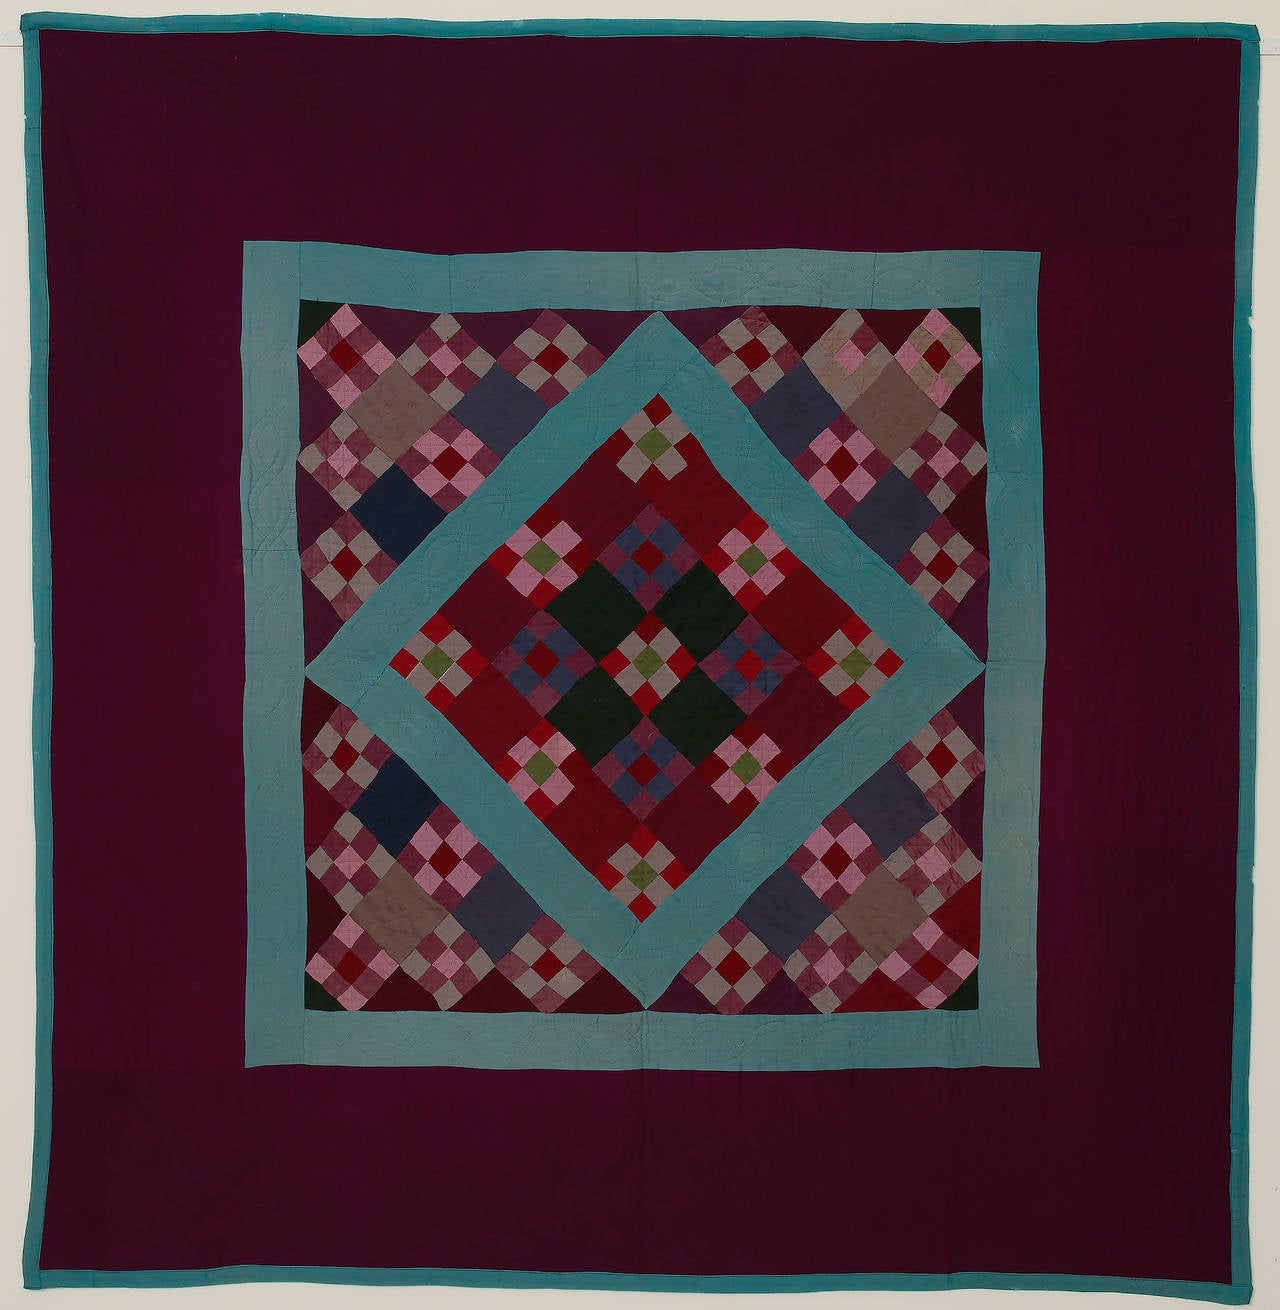 This Lancaster County Amish nine-patch diamond in a square quilt has it all. The four very dark green squares in the center diamond and the nine patches around them create an additional subtle diamond within the central one. Rarely, rarely does one